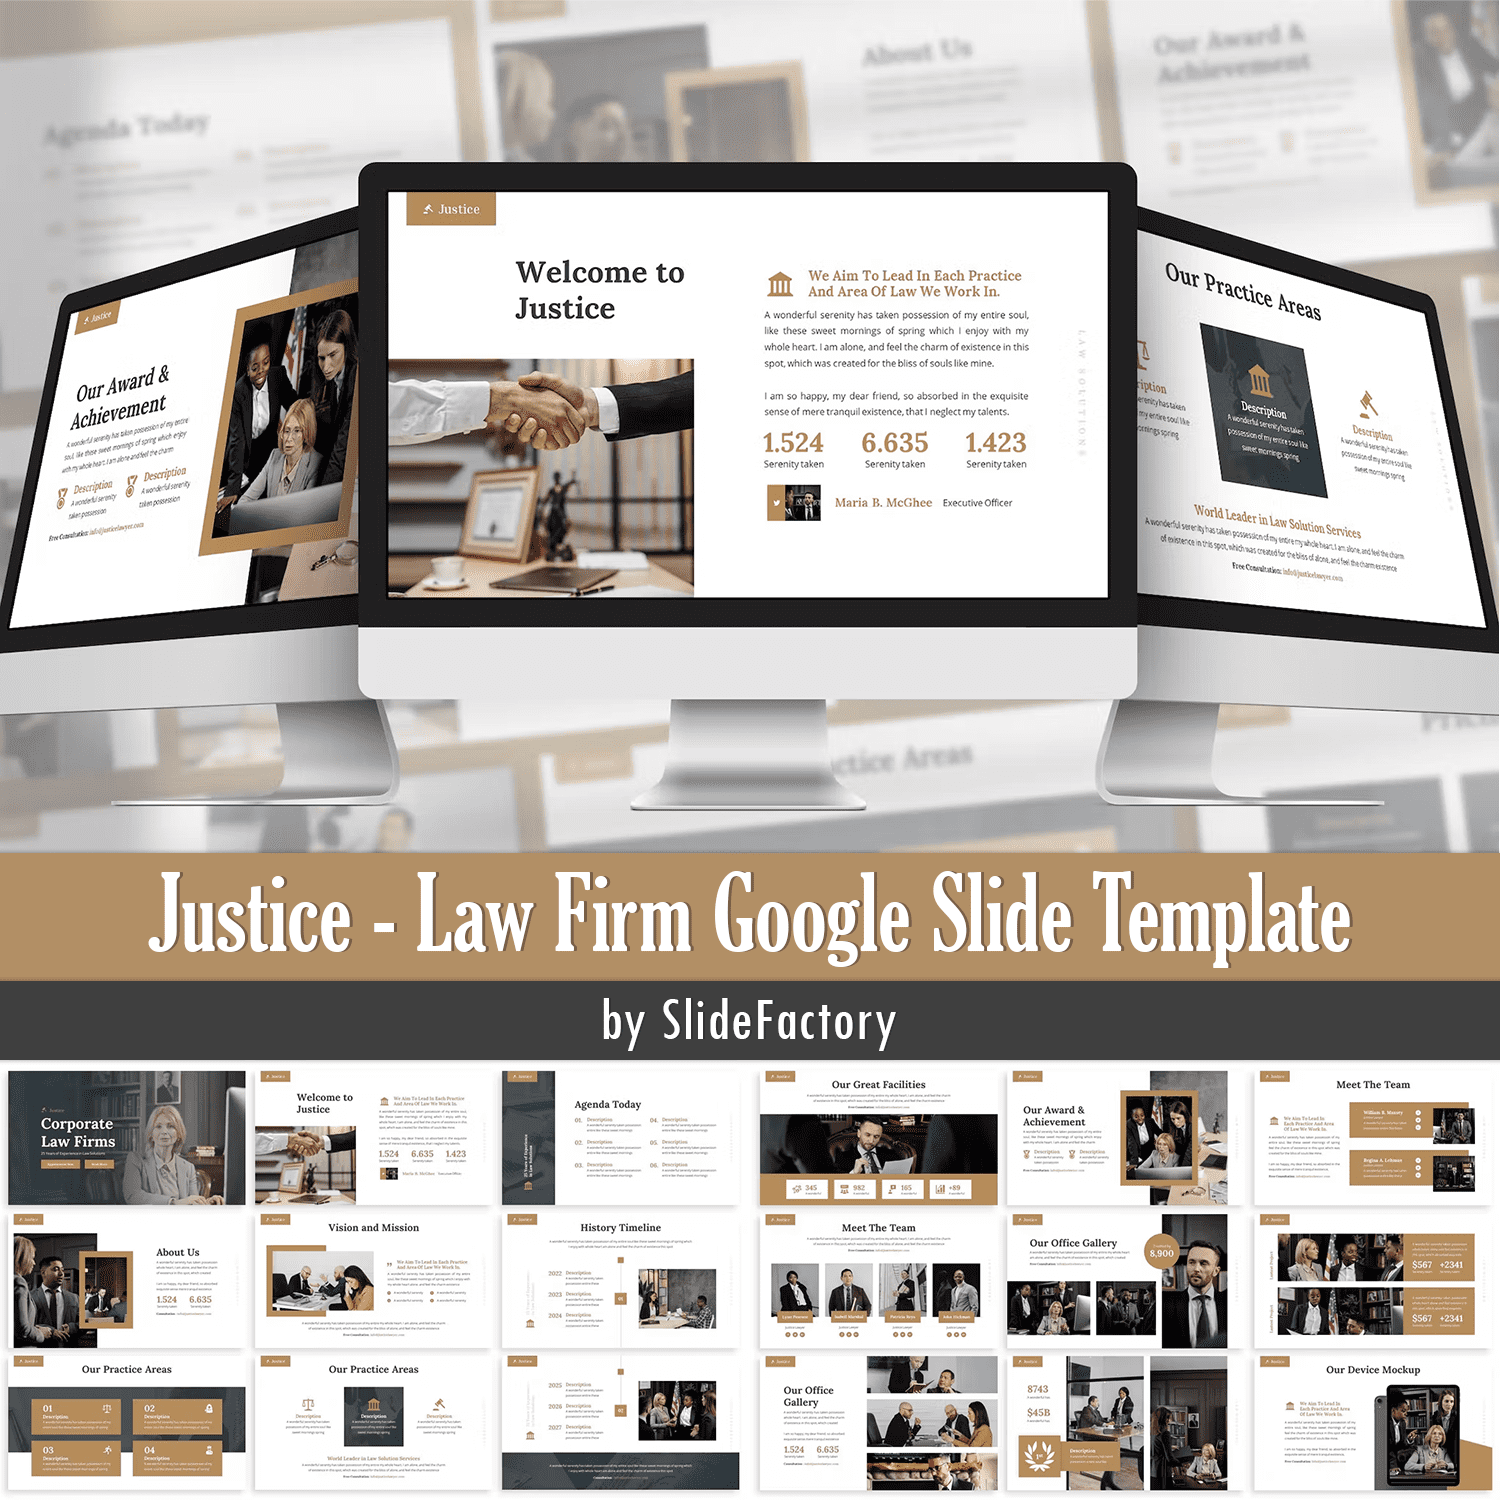 Prints of justice law firm google slide template.